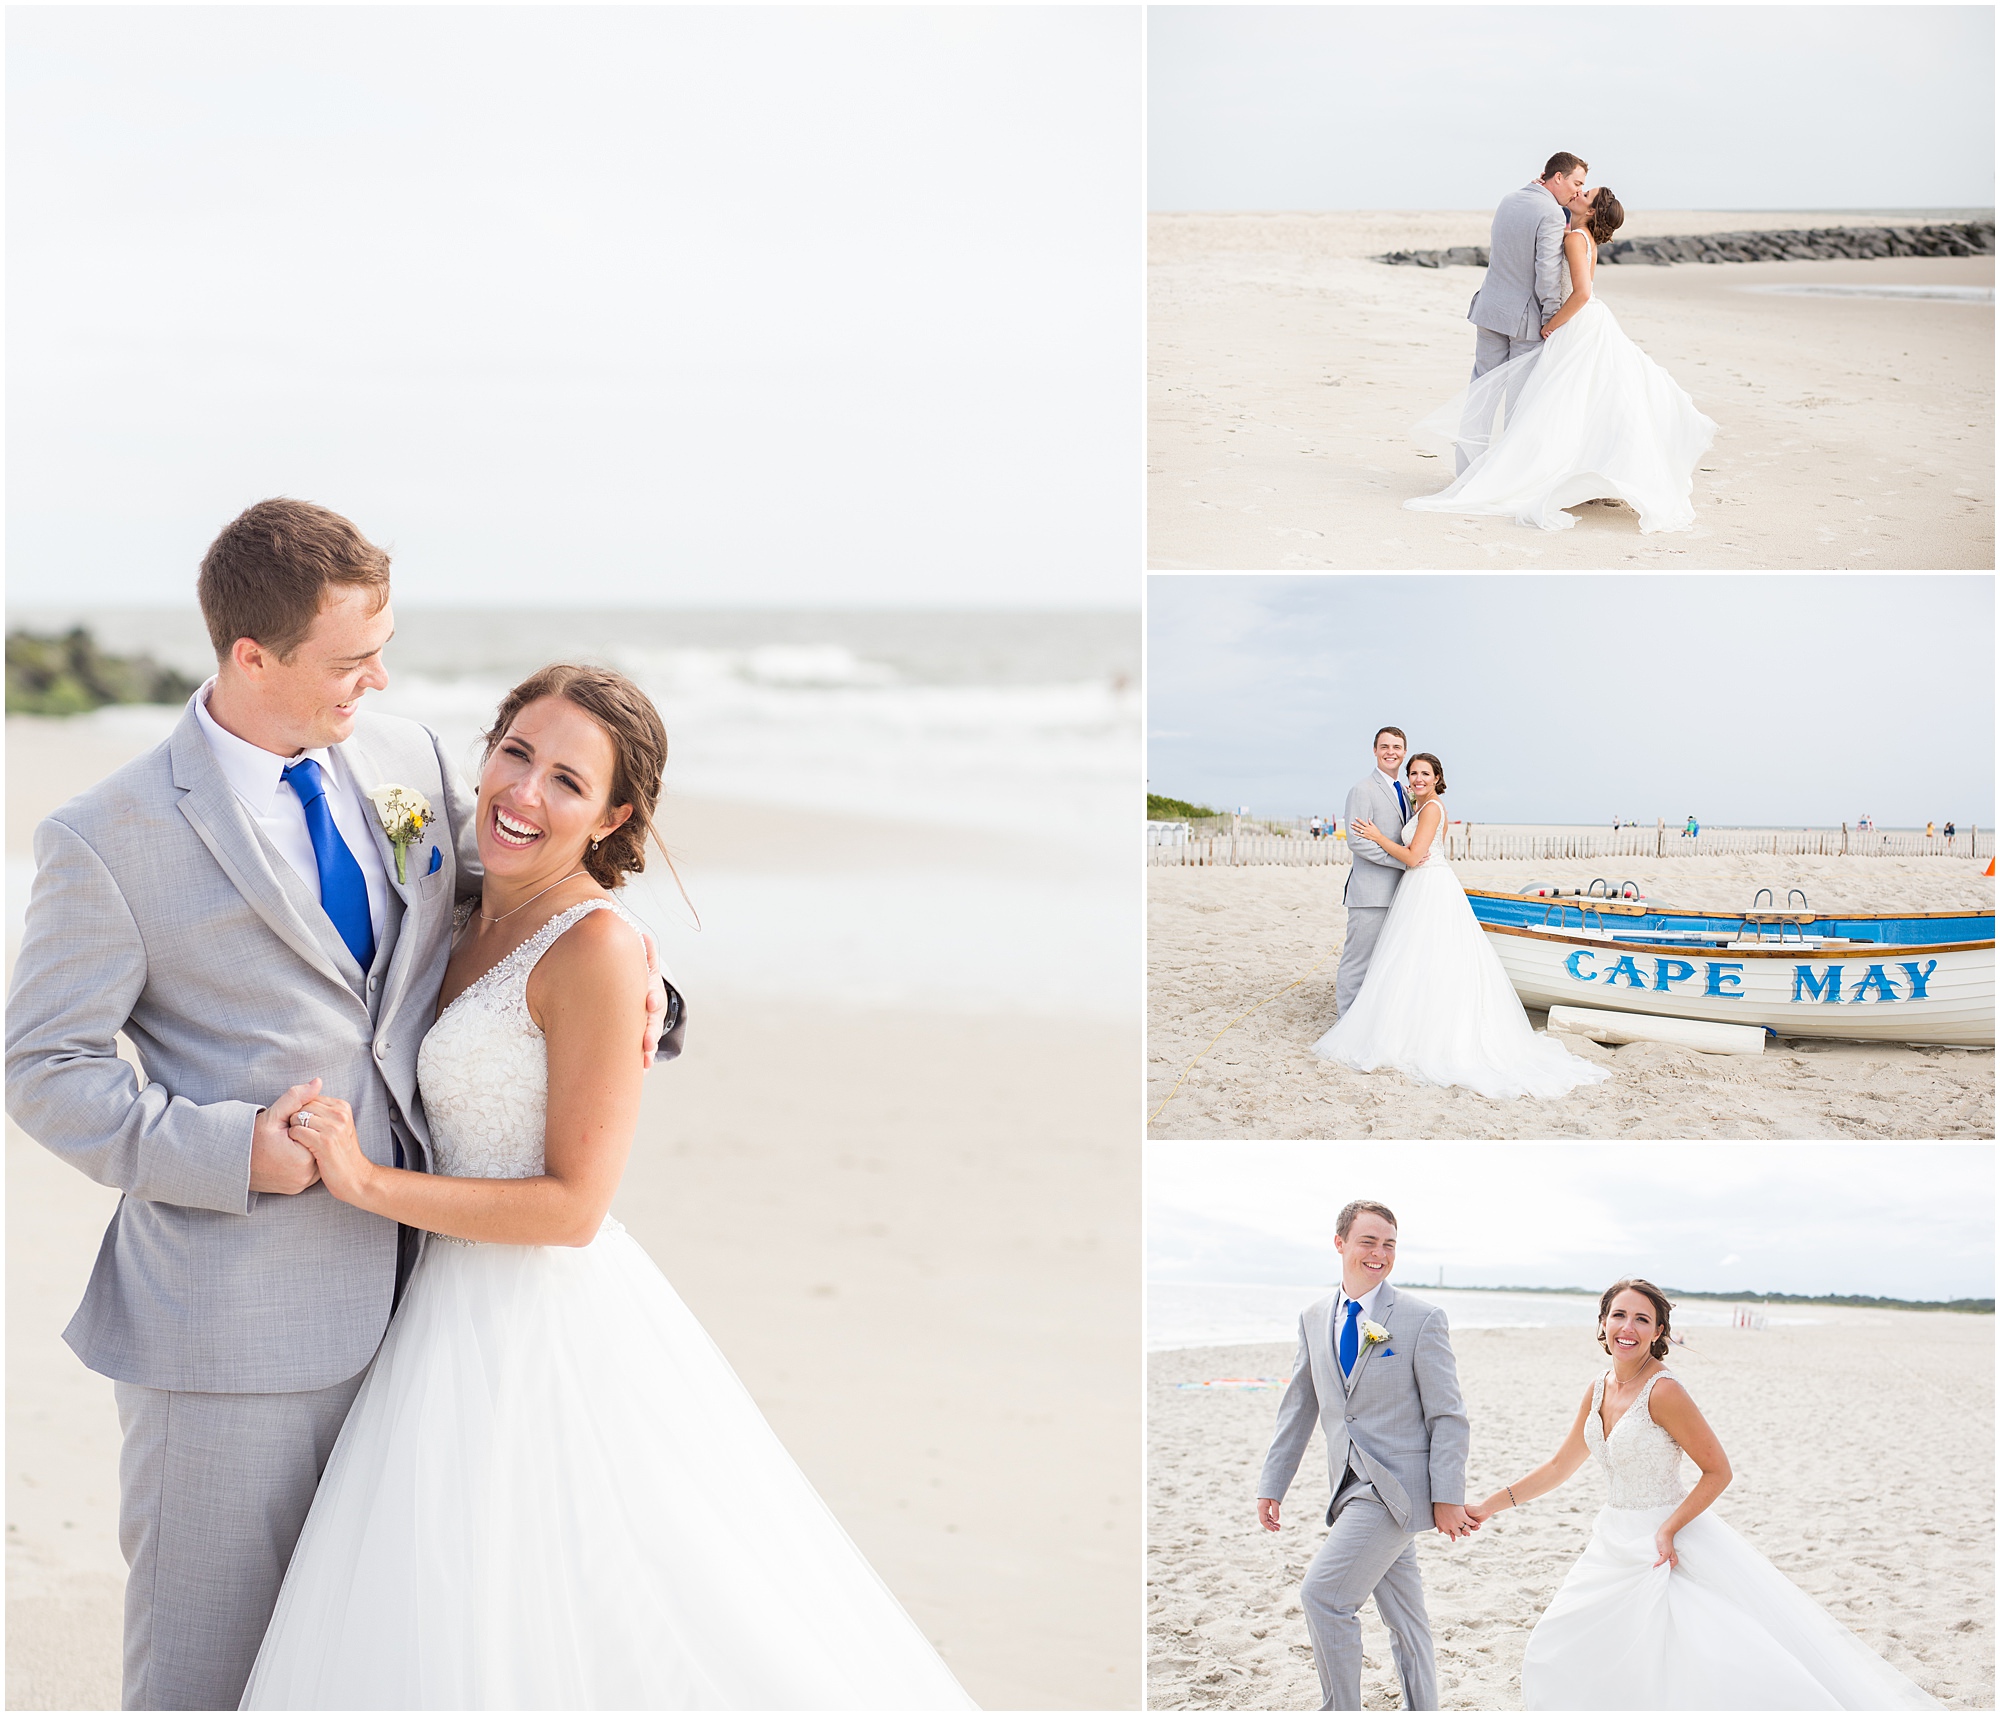 The Grand Hotel in Cape May is one of the best Jersey Shore wedding venues